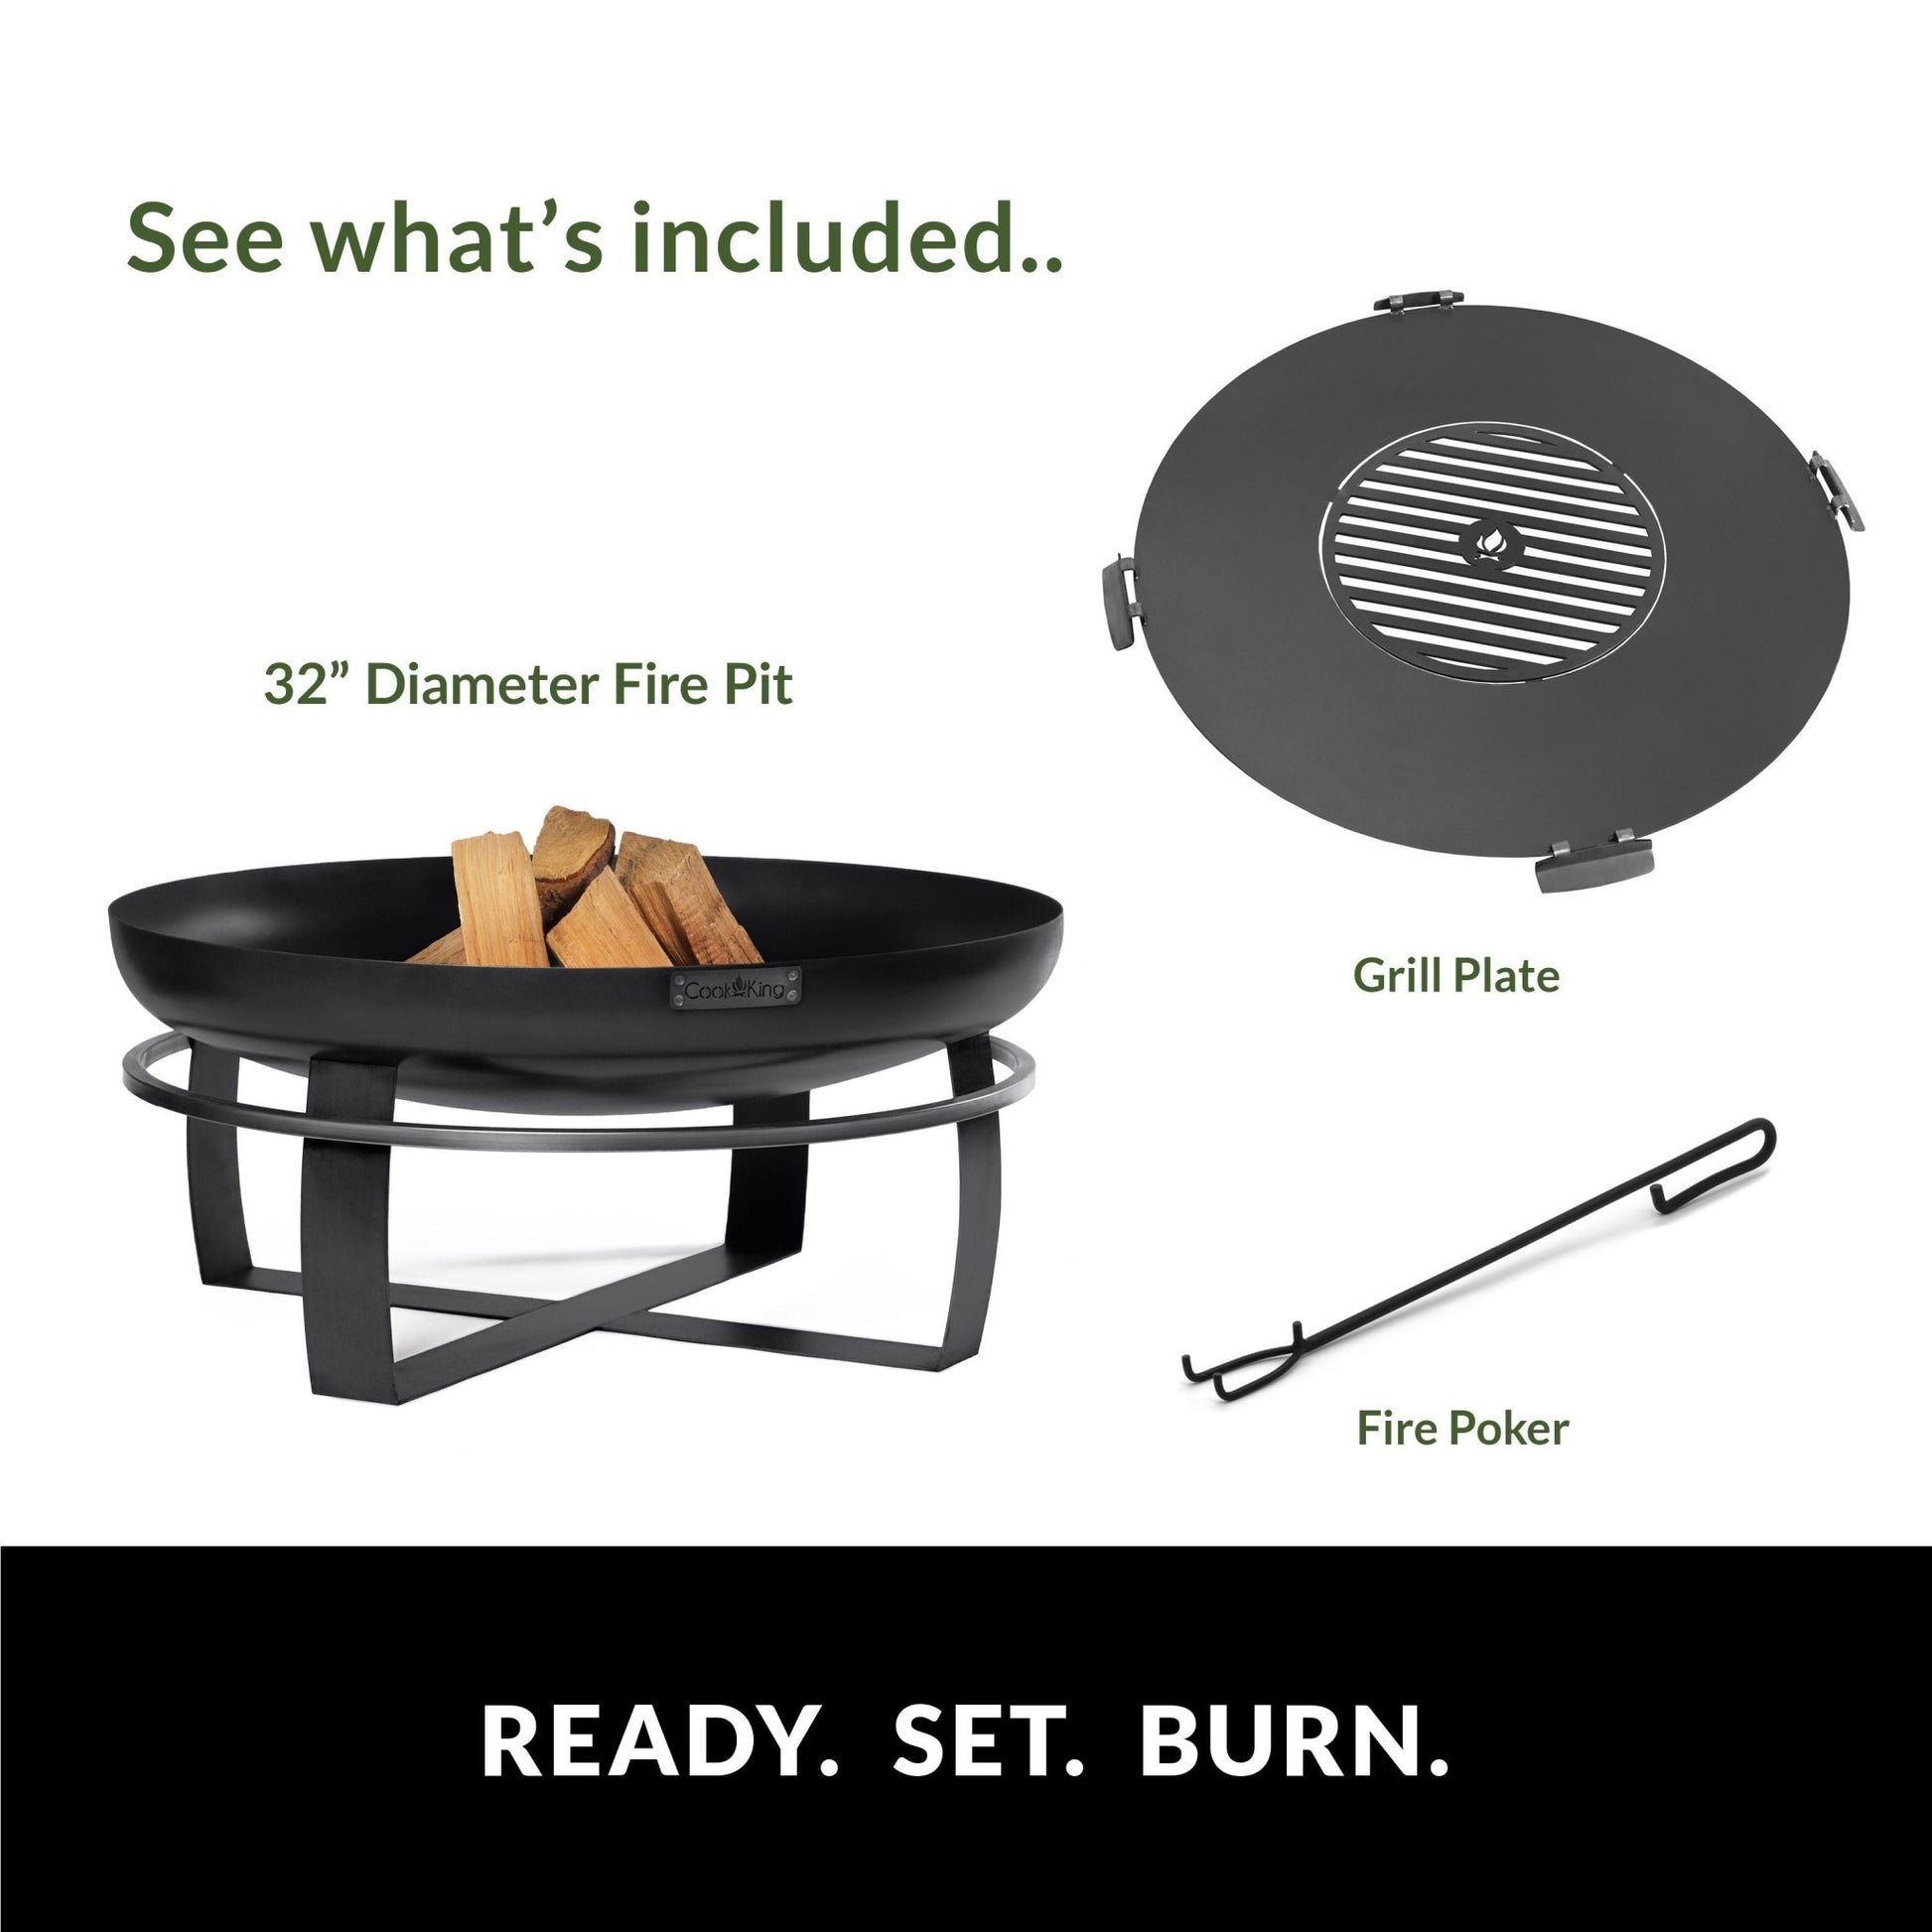 Ignition 32" Fire Pit with Grill Plate - Good Directions